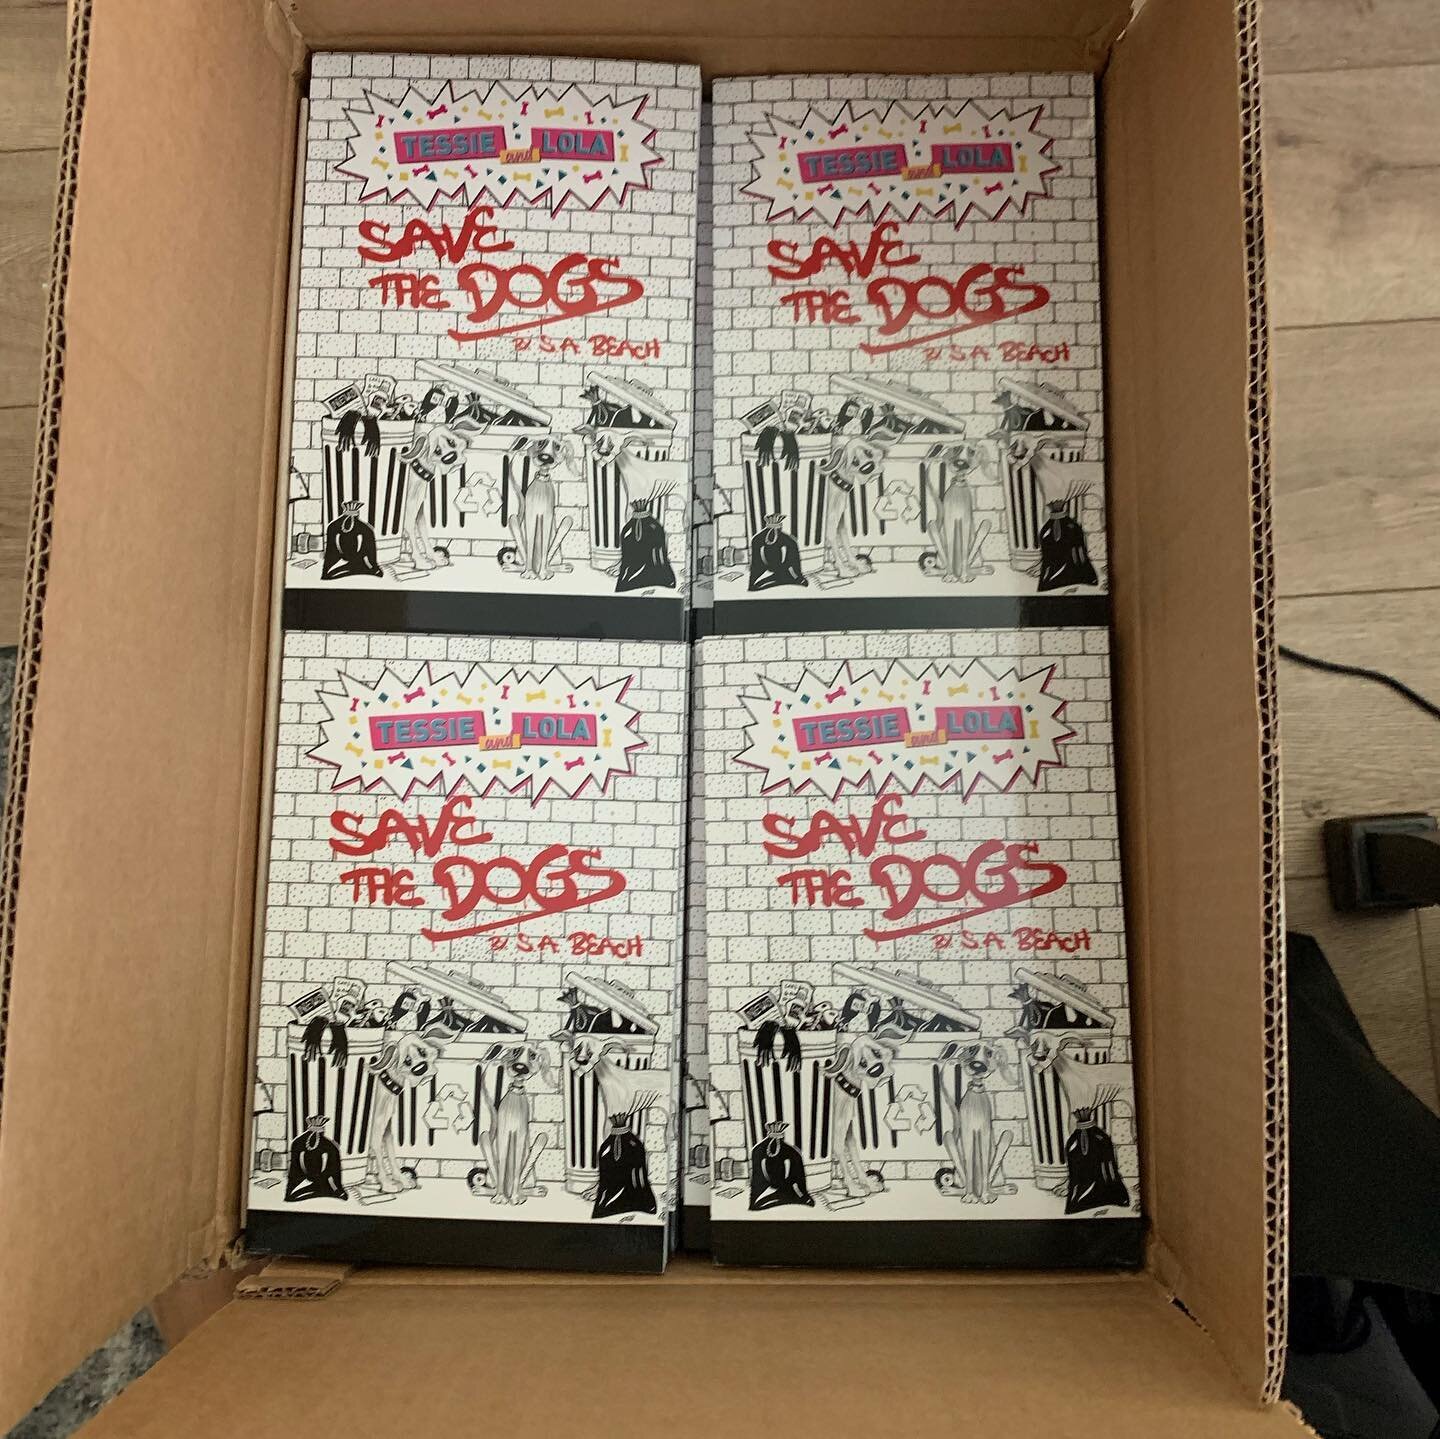 The books are here!  It was a long journey to get to this point, now it&rsquo;s time for the next step.  Thanks to all of the help I received in making this dream come true. #letssellsomebooks #middlegradebooks #tessieandlolasavethedogs